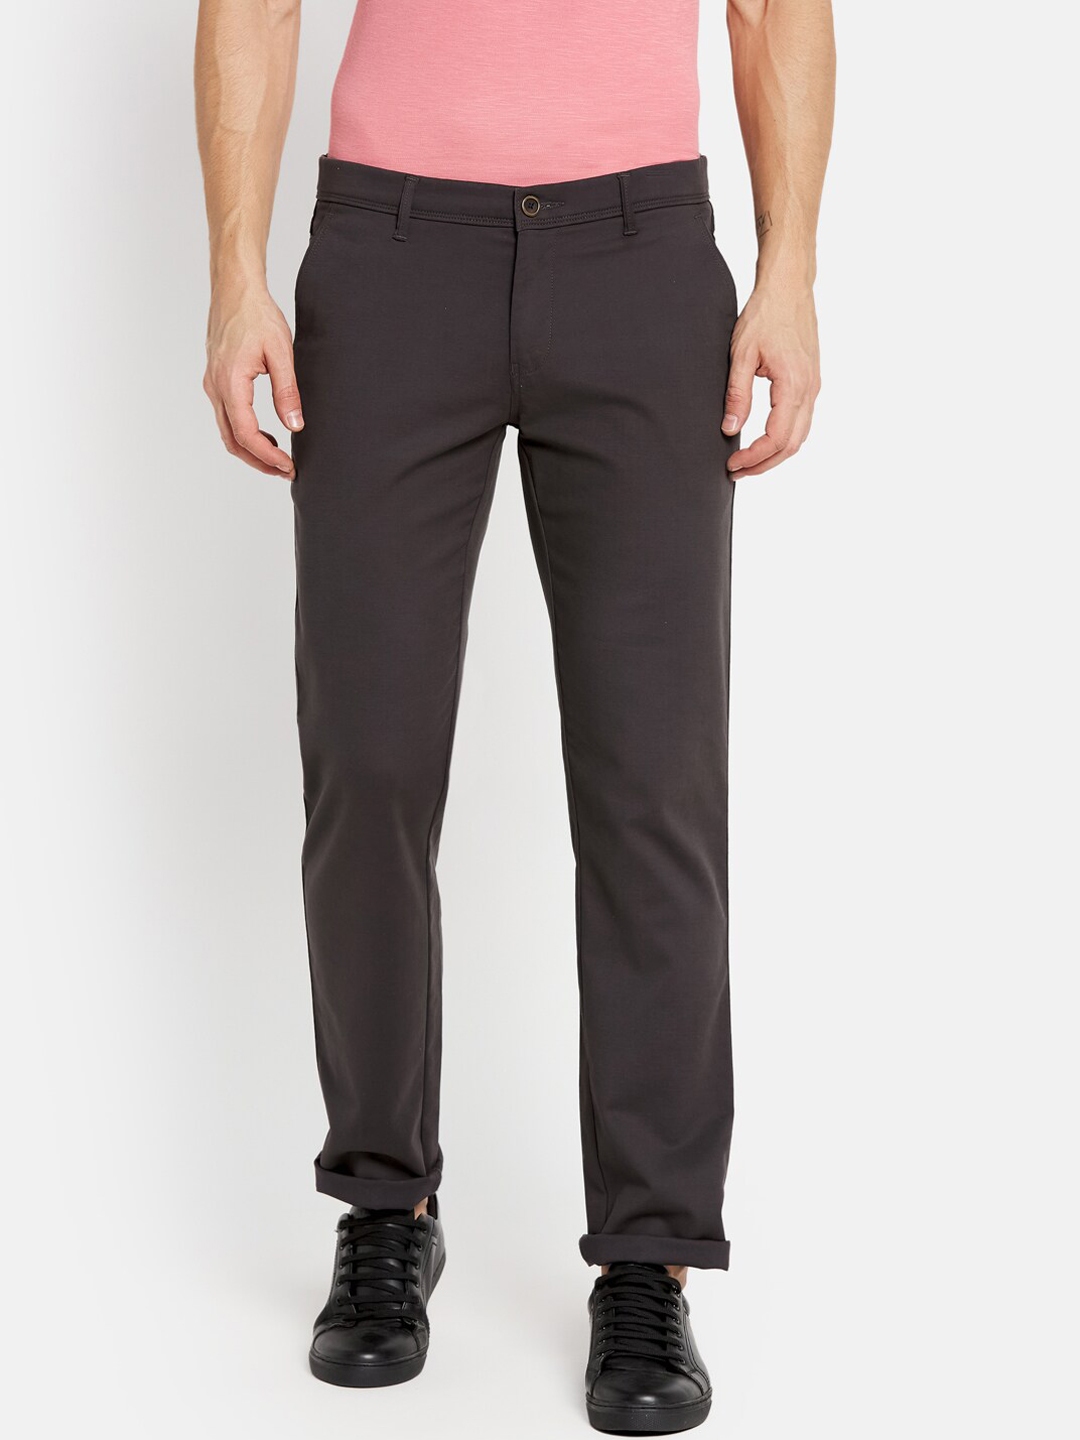 Buy Octave Men Brown Chinos Trousers - Trousers for Men 17852402 | Myntra